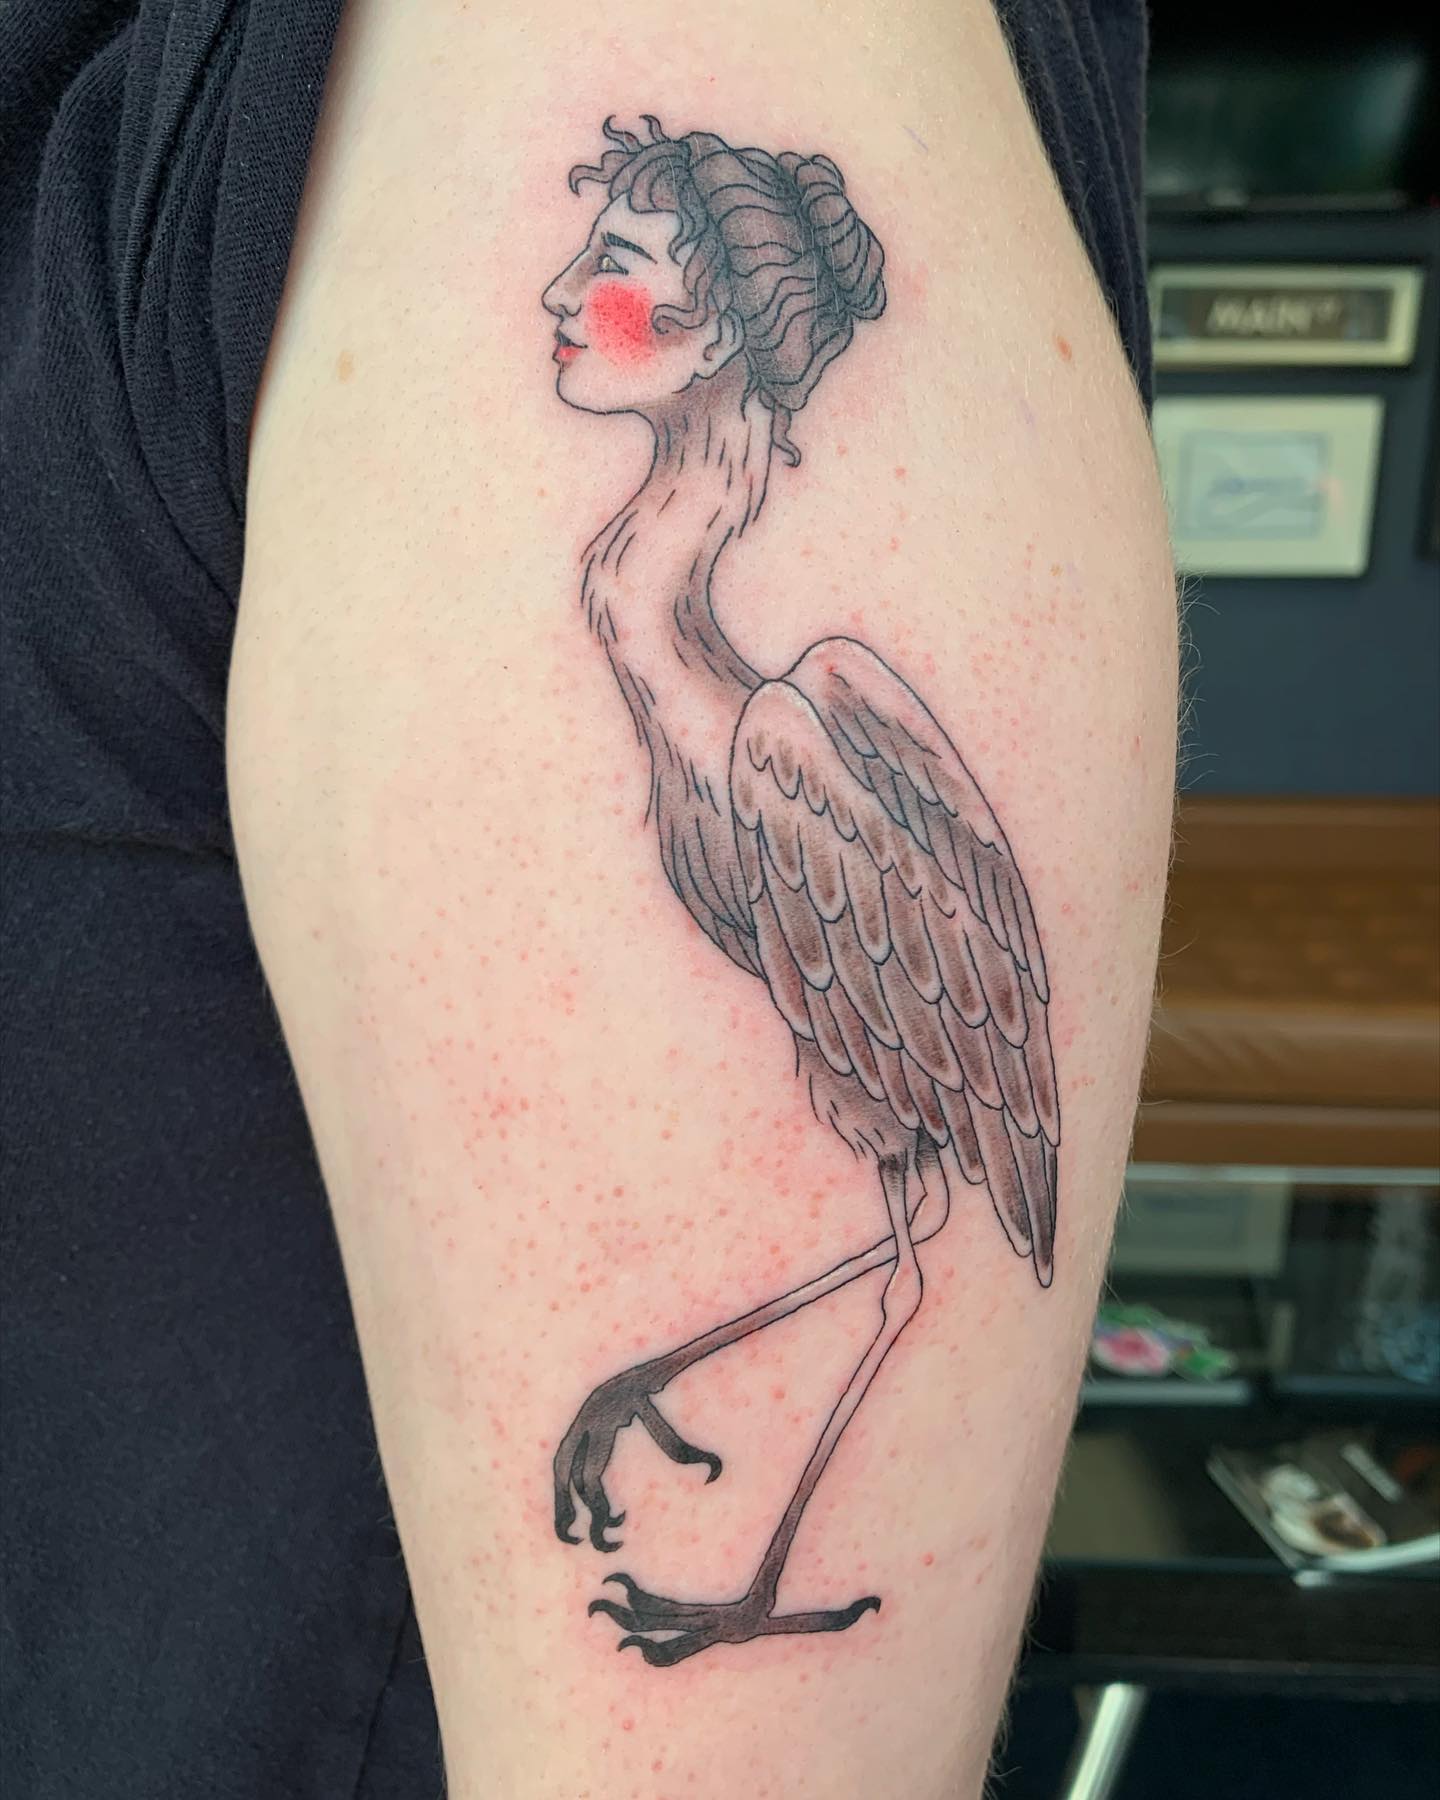 A crane woman may look like something crazy but this unusual tattoo can be a nice idea.